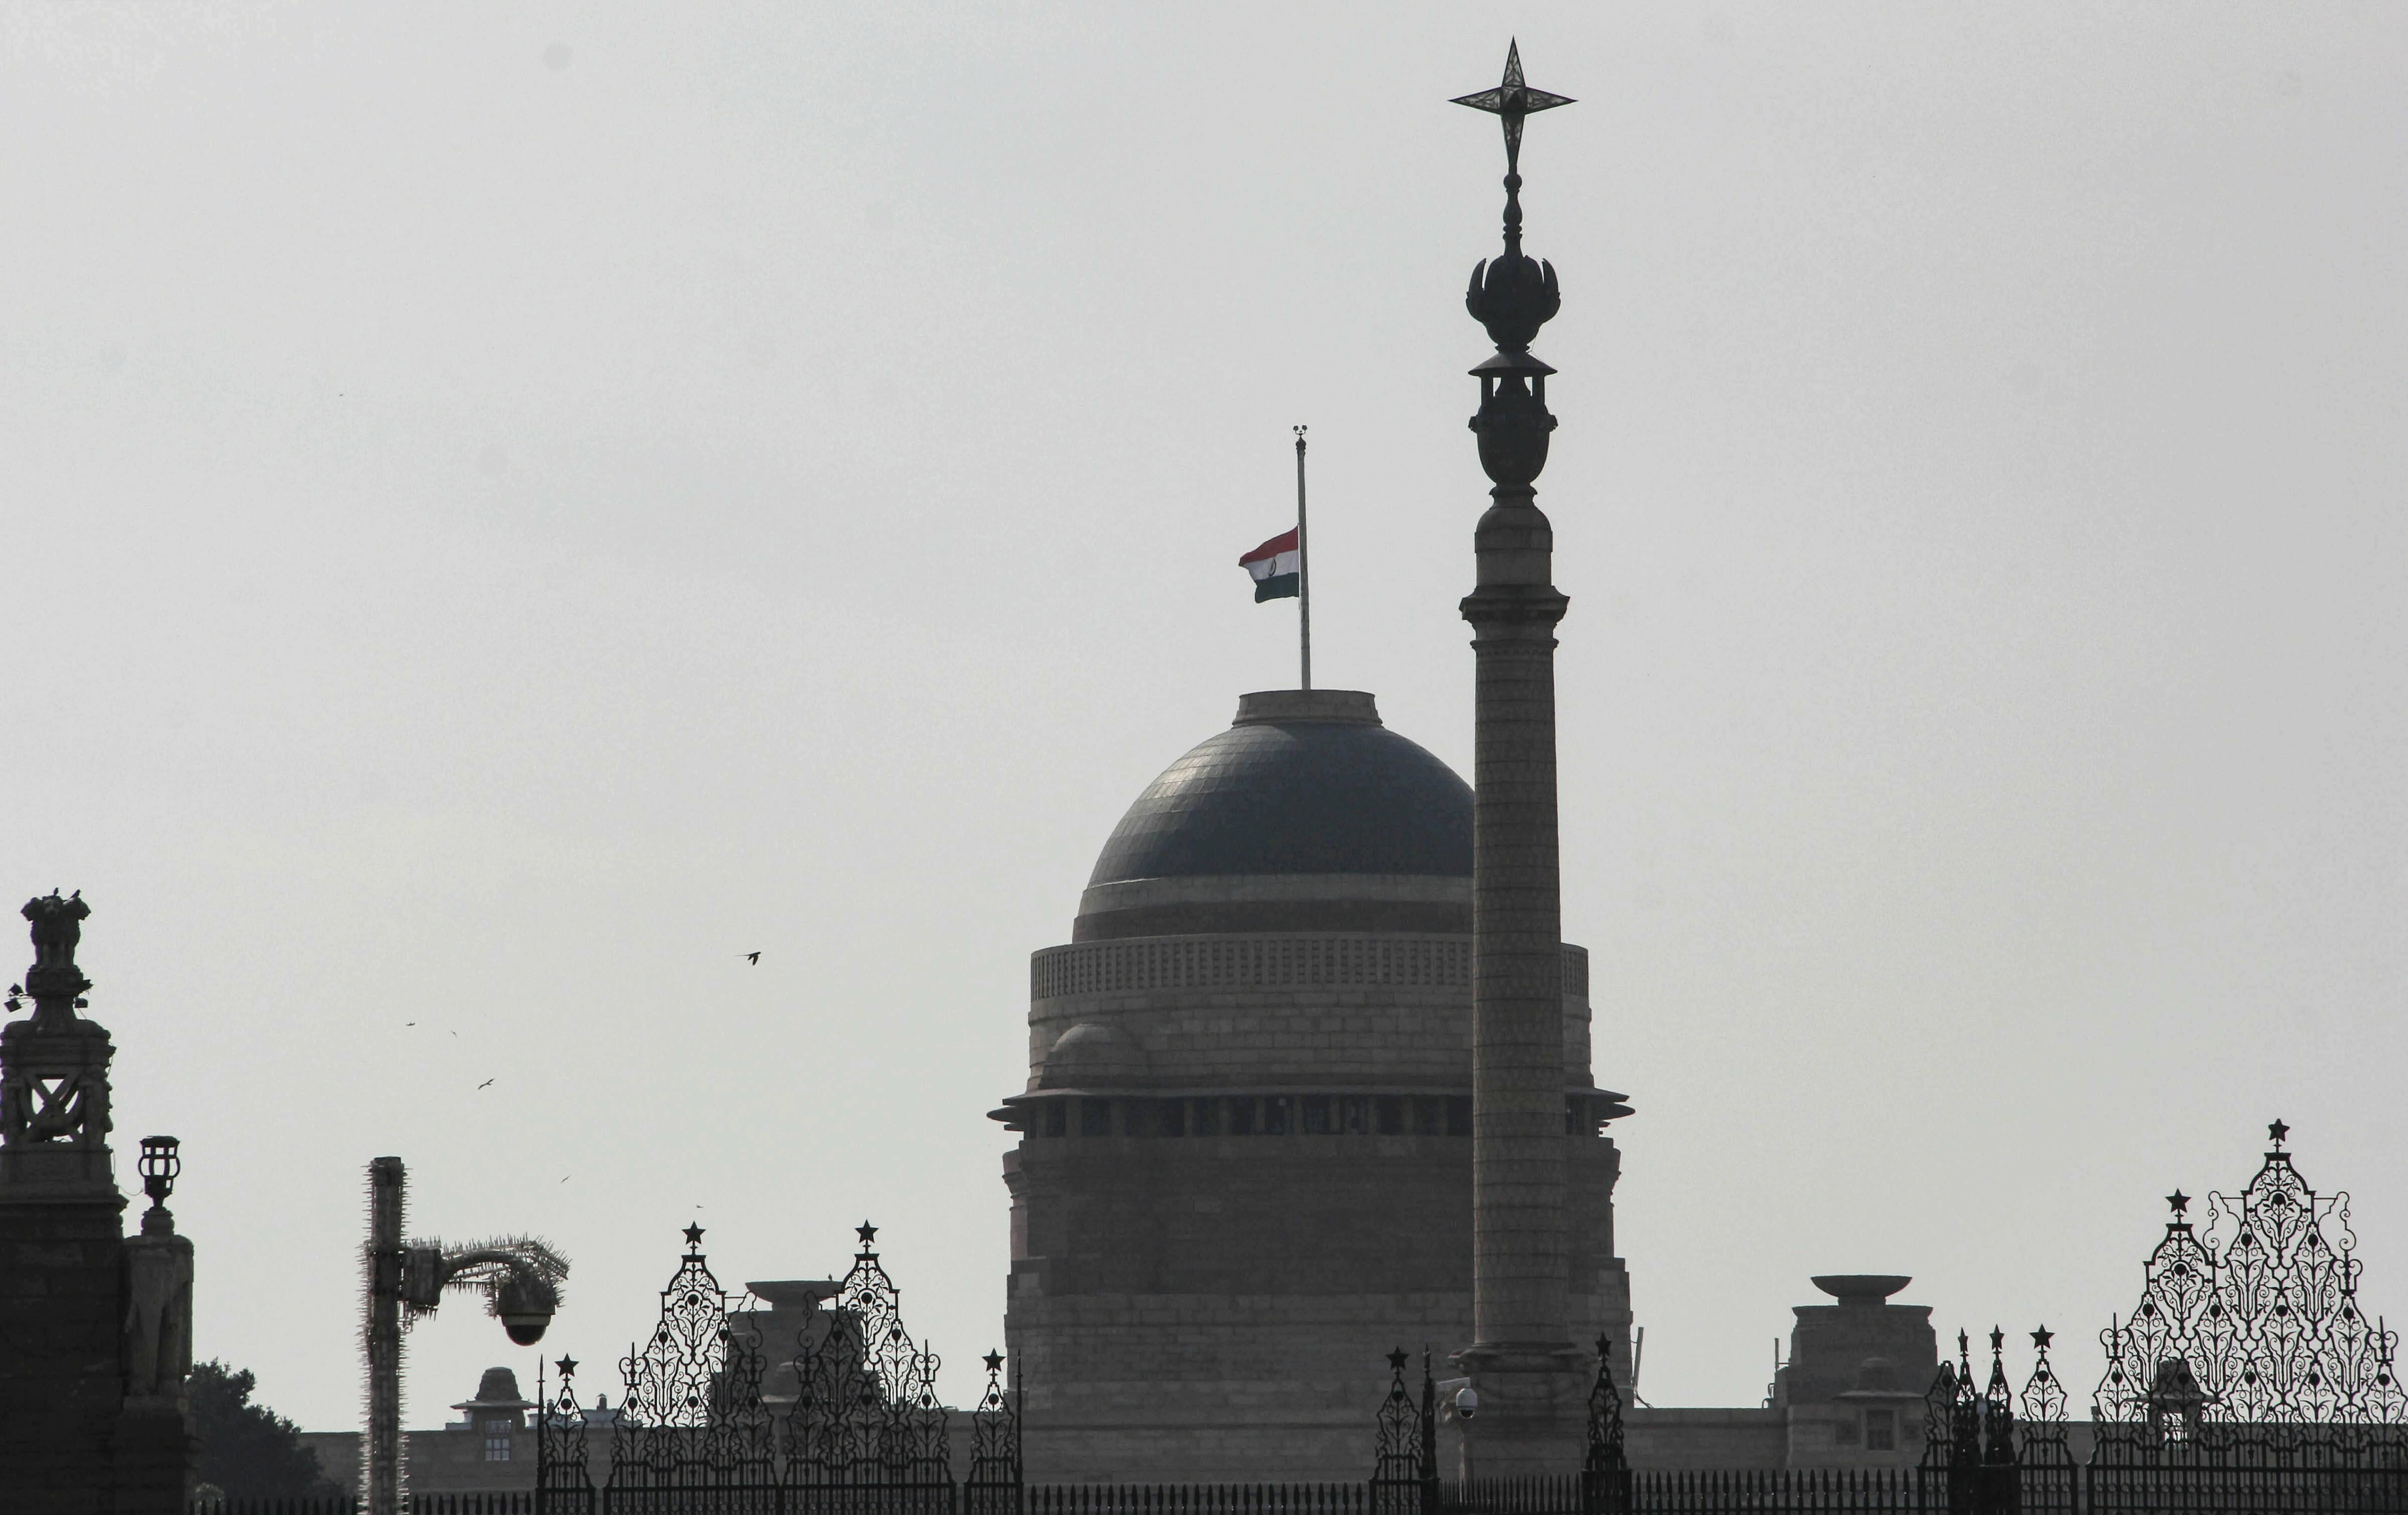 National flag is seen at half-mast to mourn the death of Goa Chief Minister Manohar Parrikar, at Rashtrapati Bhawan in New Delhi - PTI